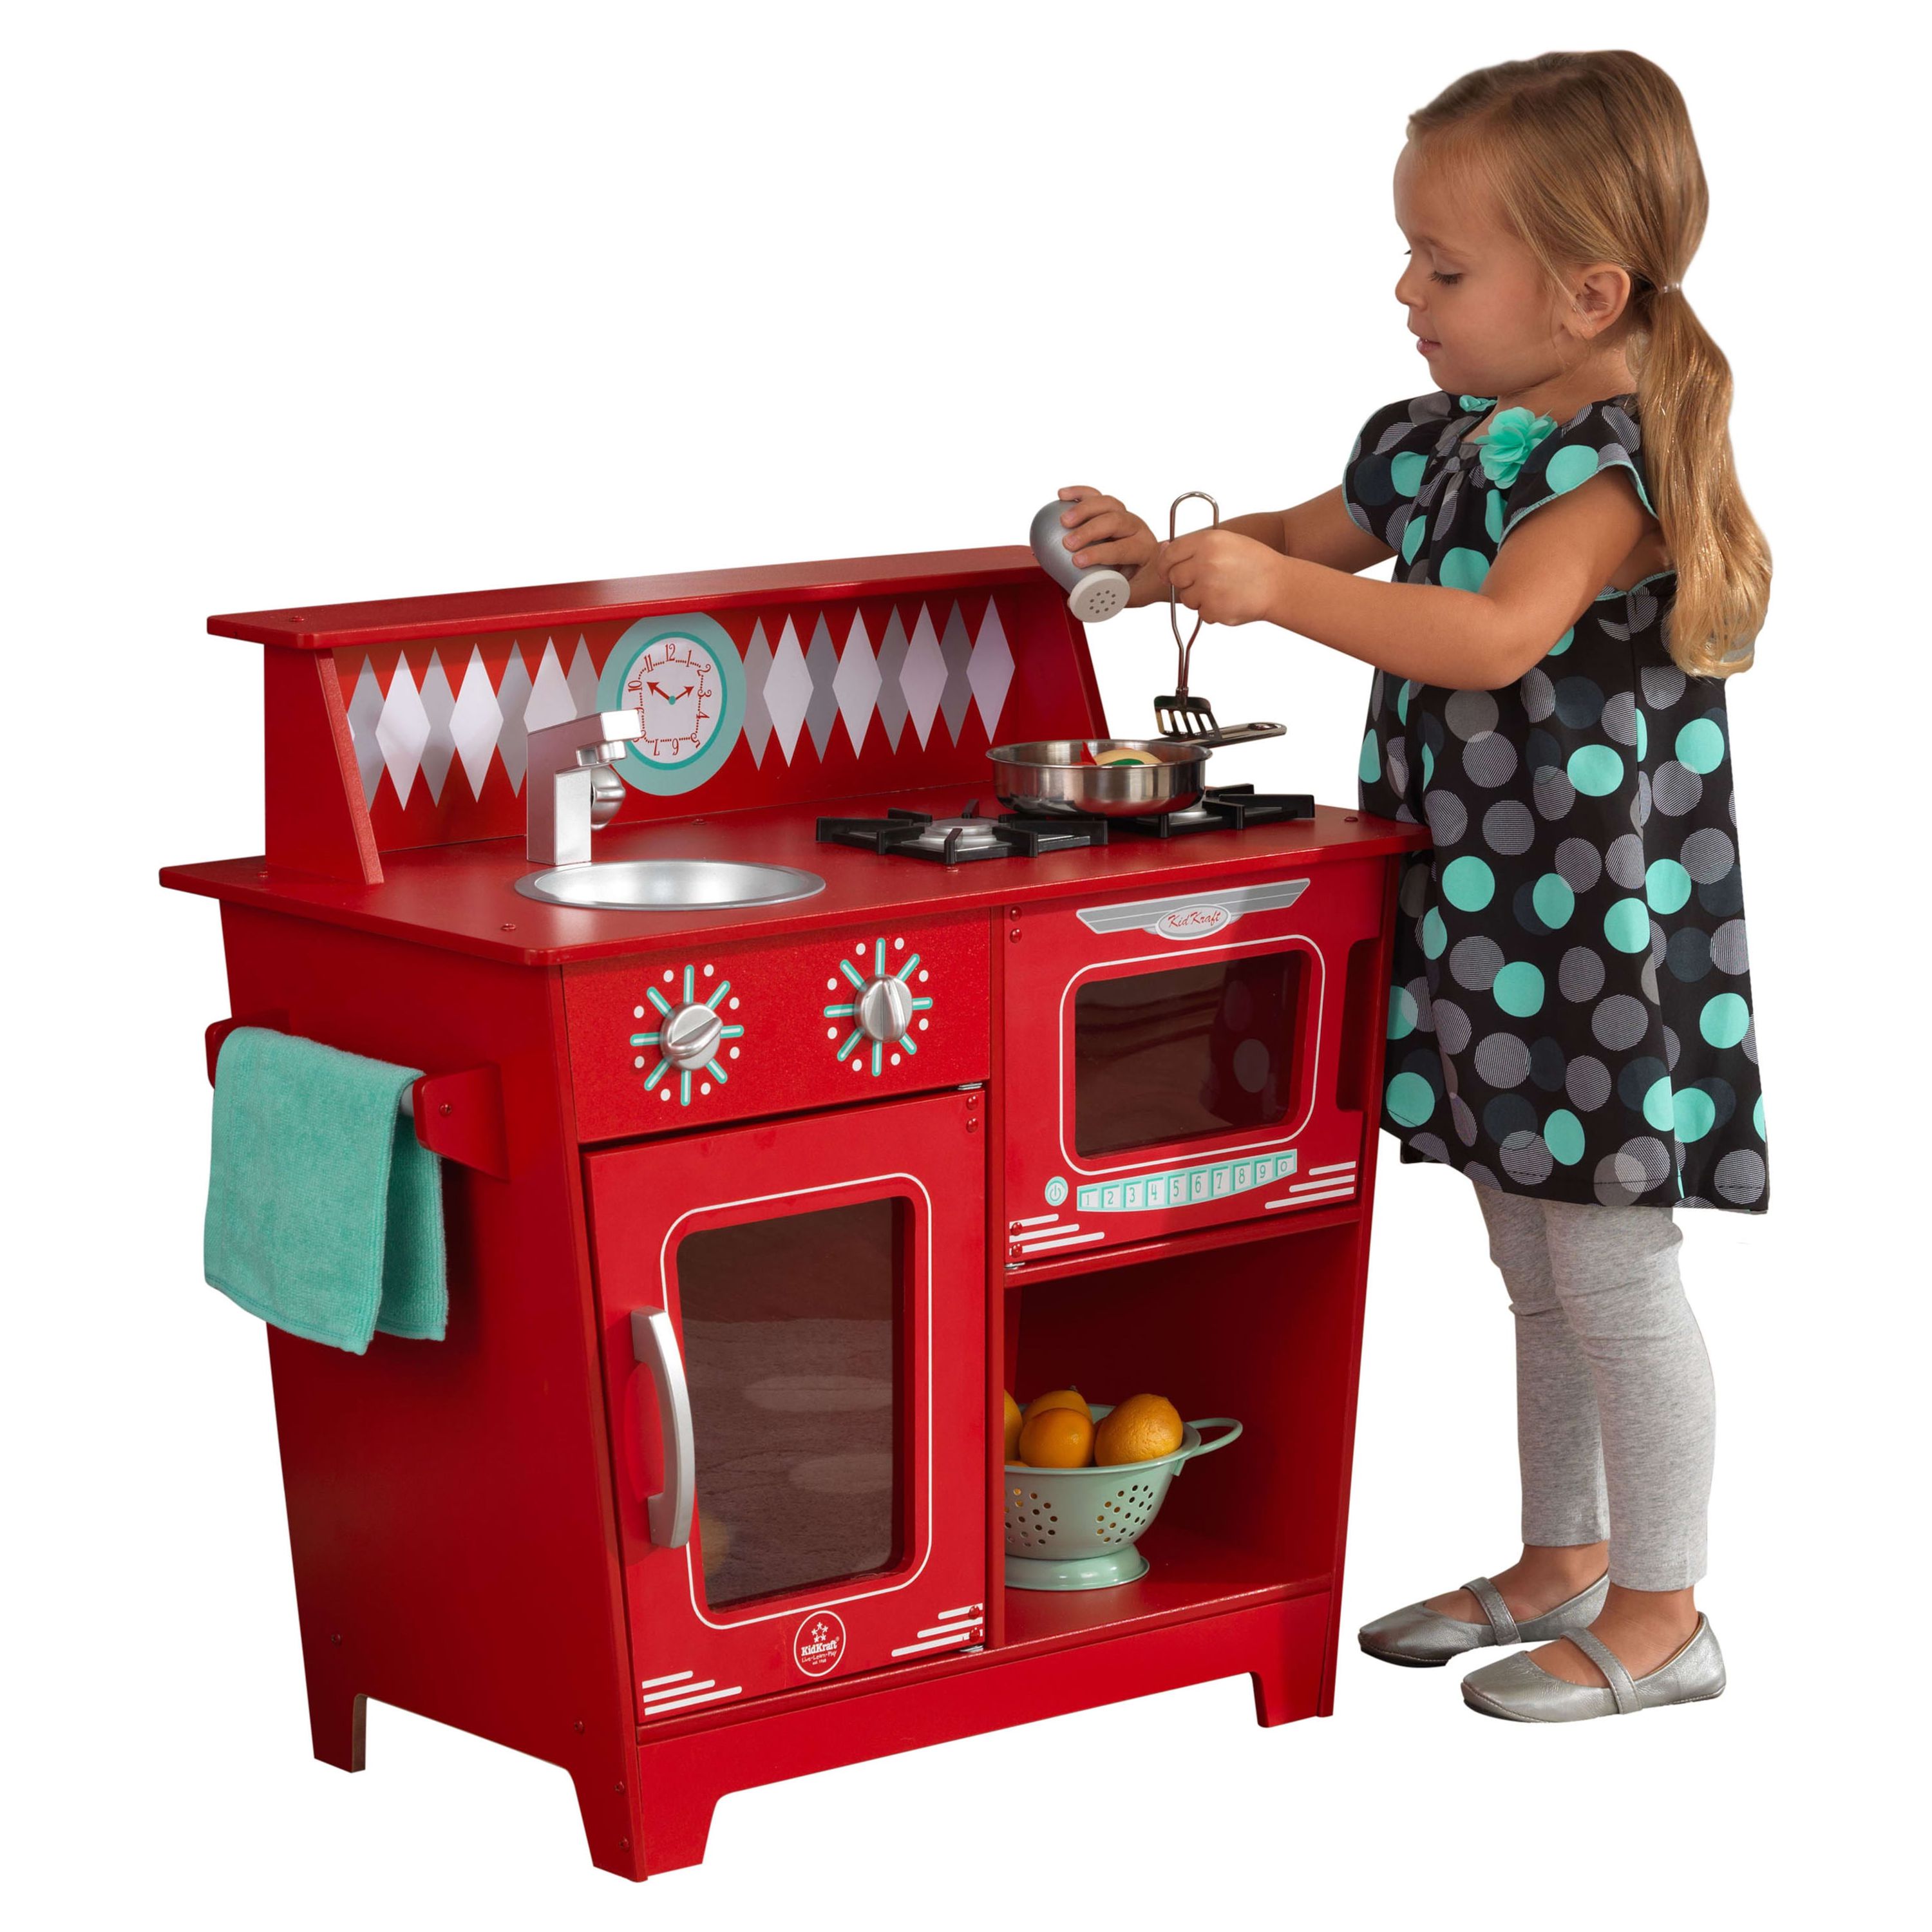 KidKraft Classic Wooden Pretend Play Cooking Kitchenette Toy Set for Kids Red - image 1 of 10